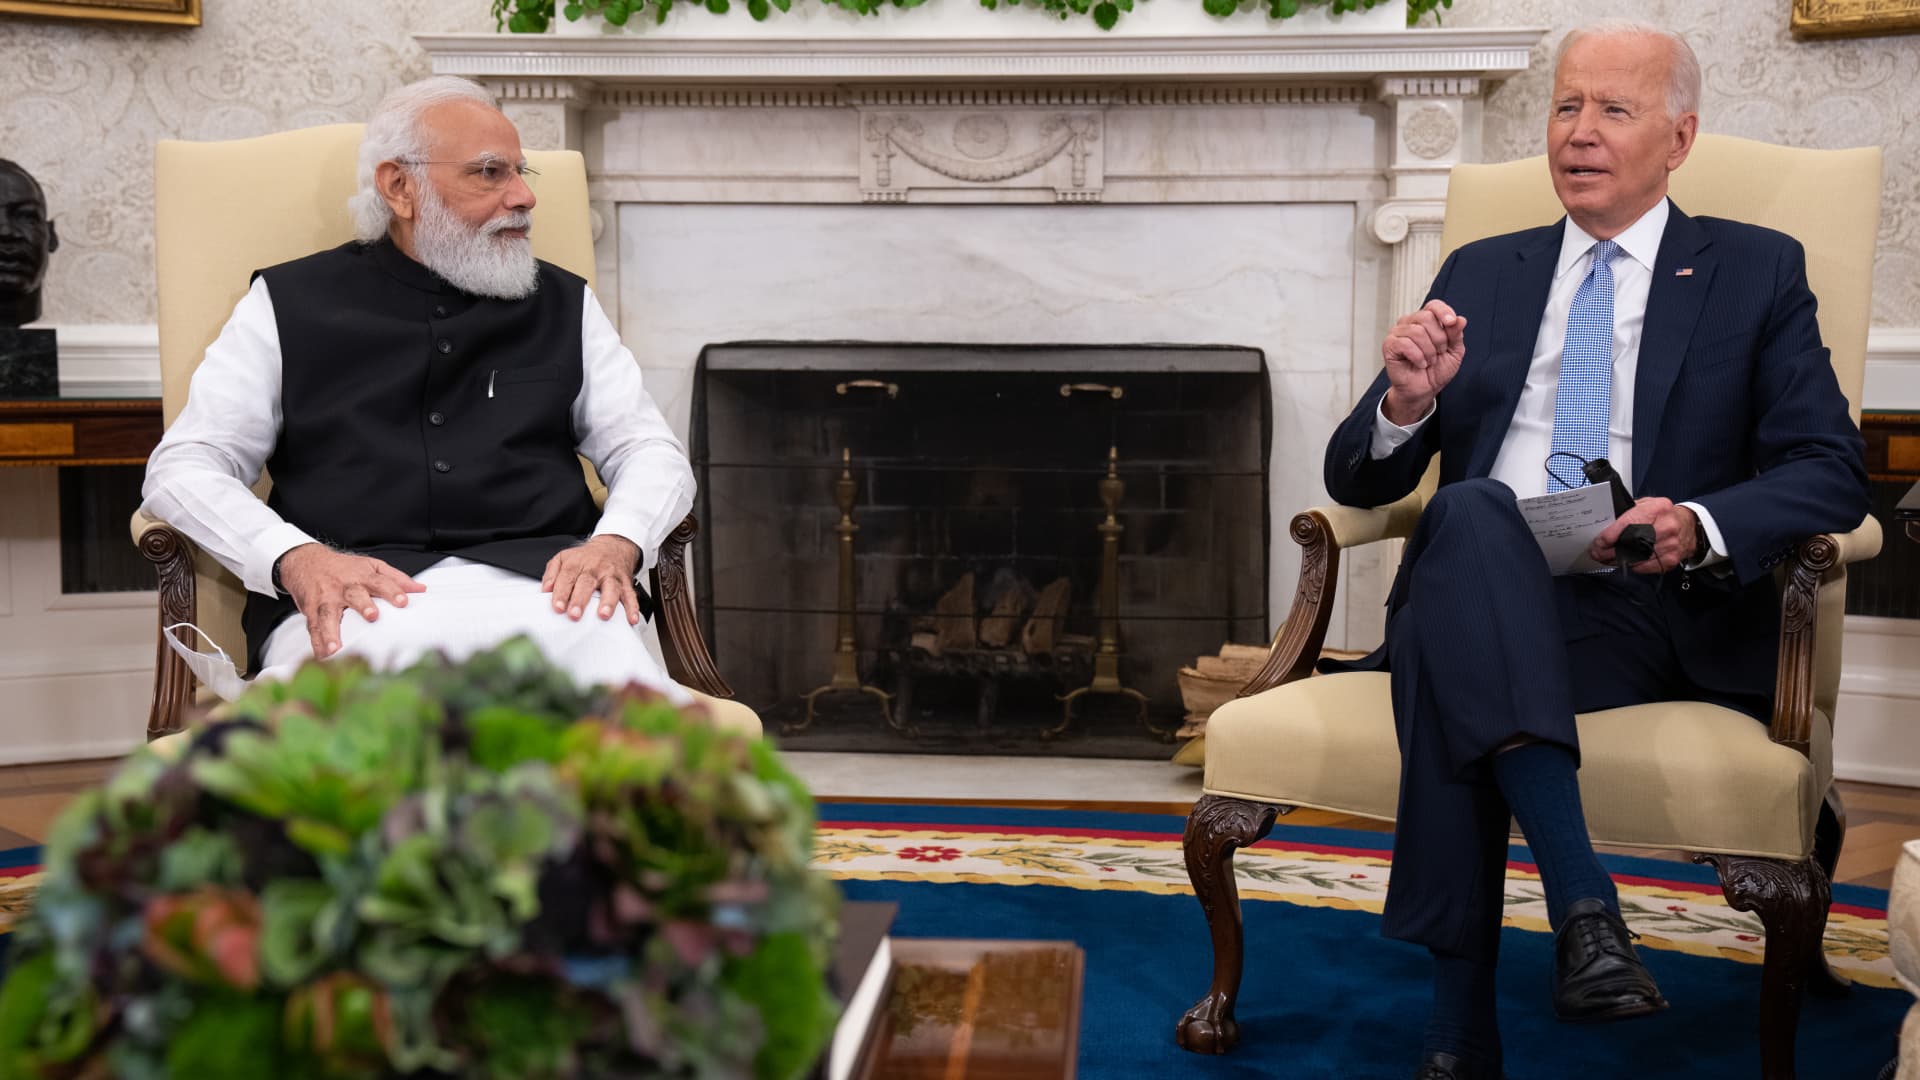 India’s Modi is on a landmark visit to the U.S. Here’s what to expect